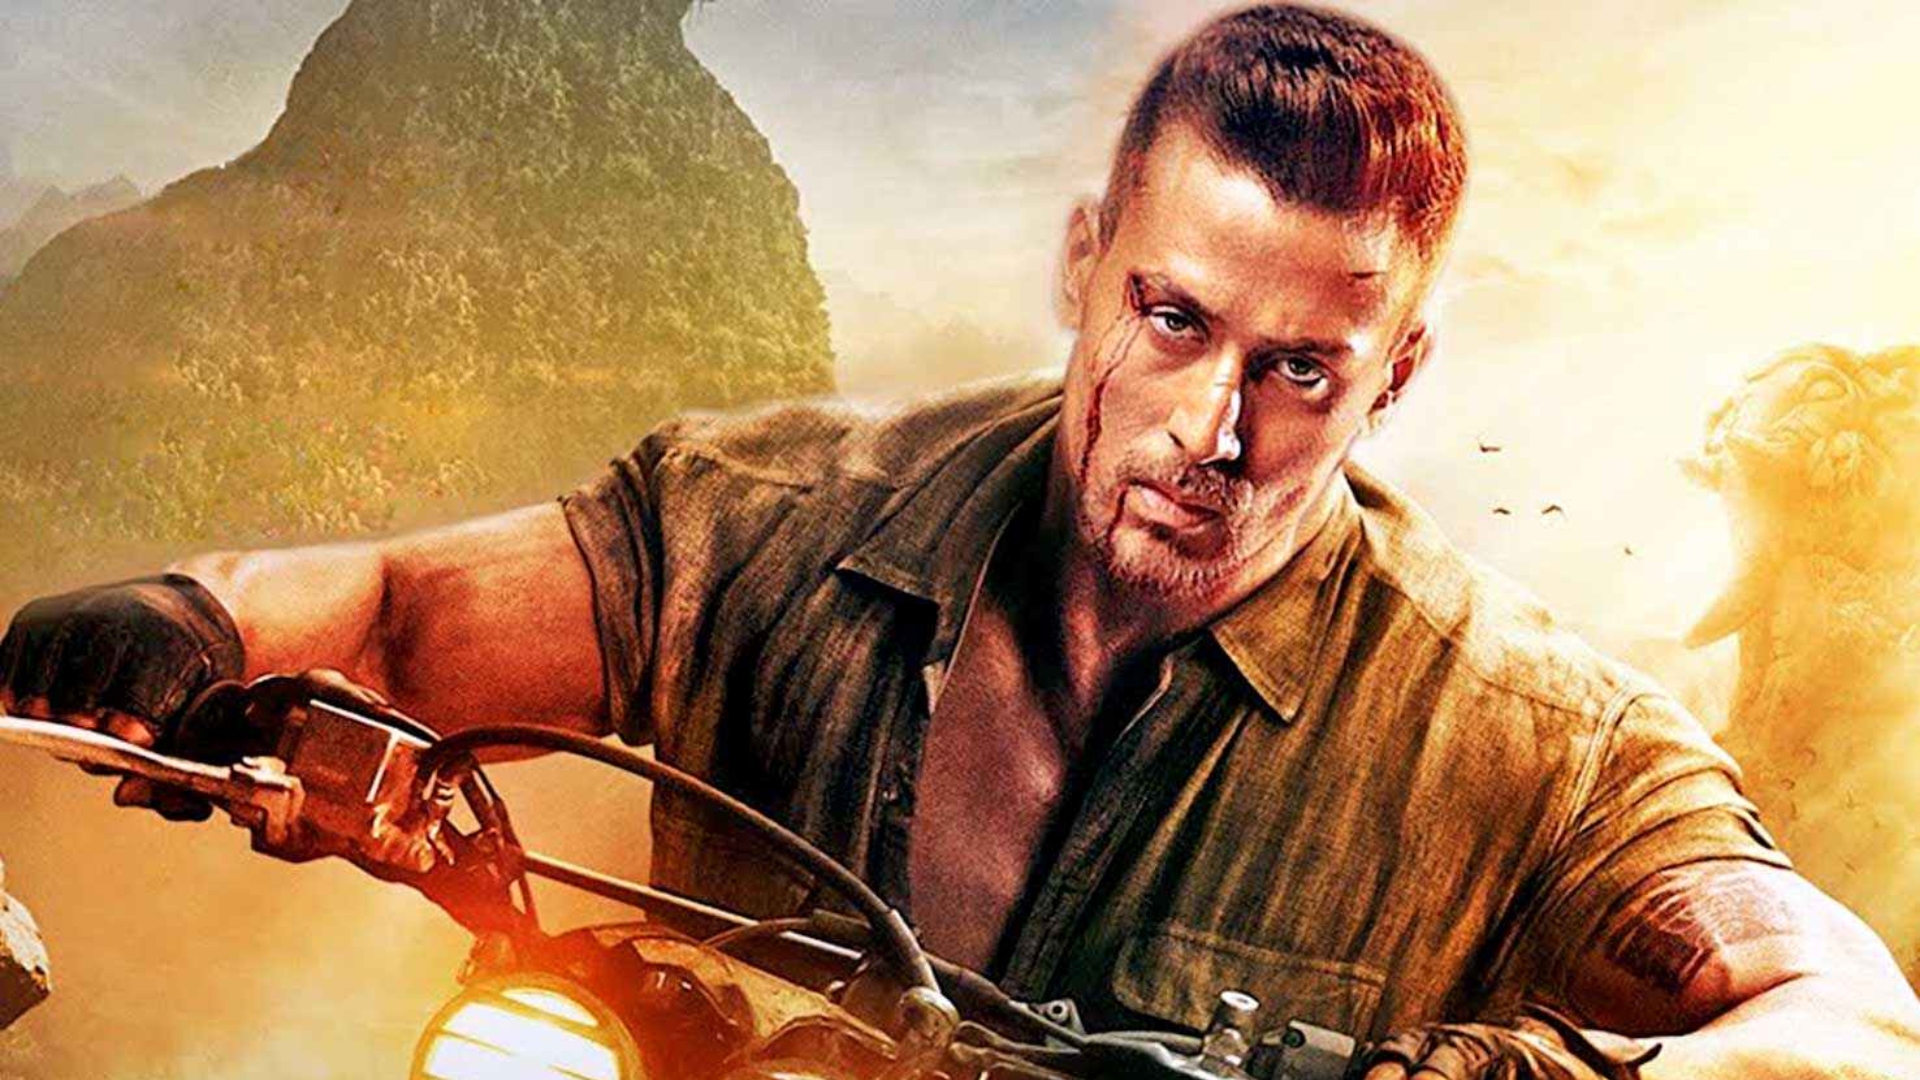 Baaghi 3 Download Wallpapers